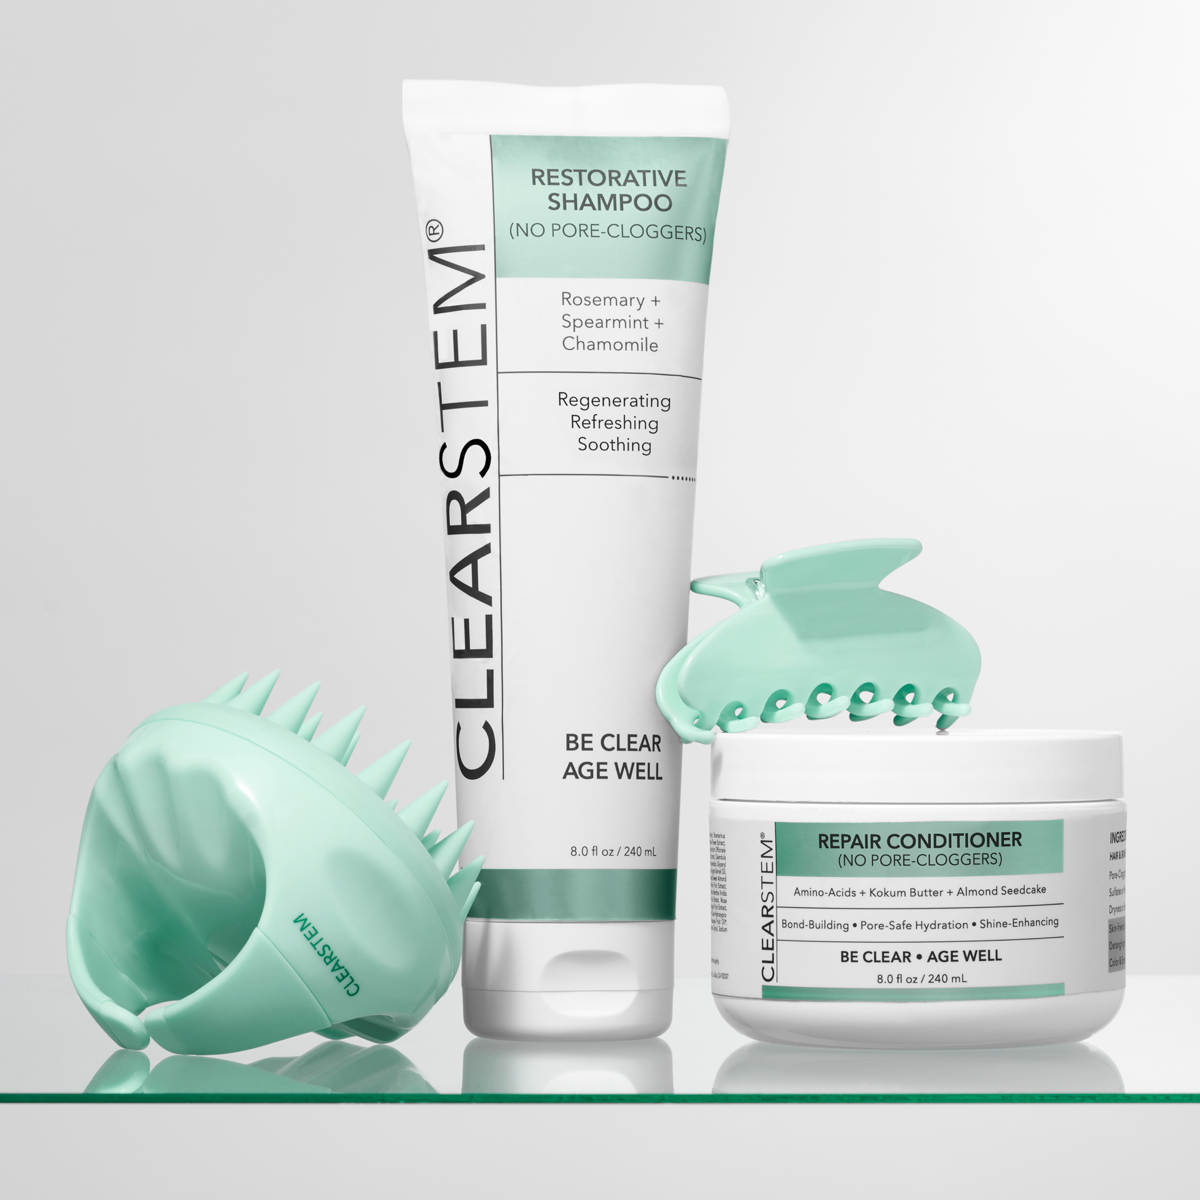 CLEARSTEM acne-safe shampoo and conditioner